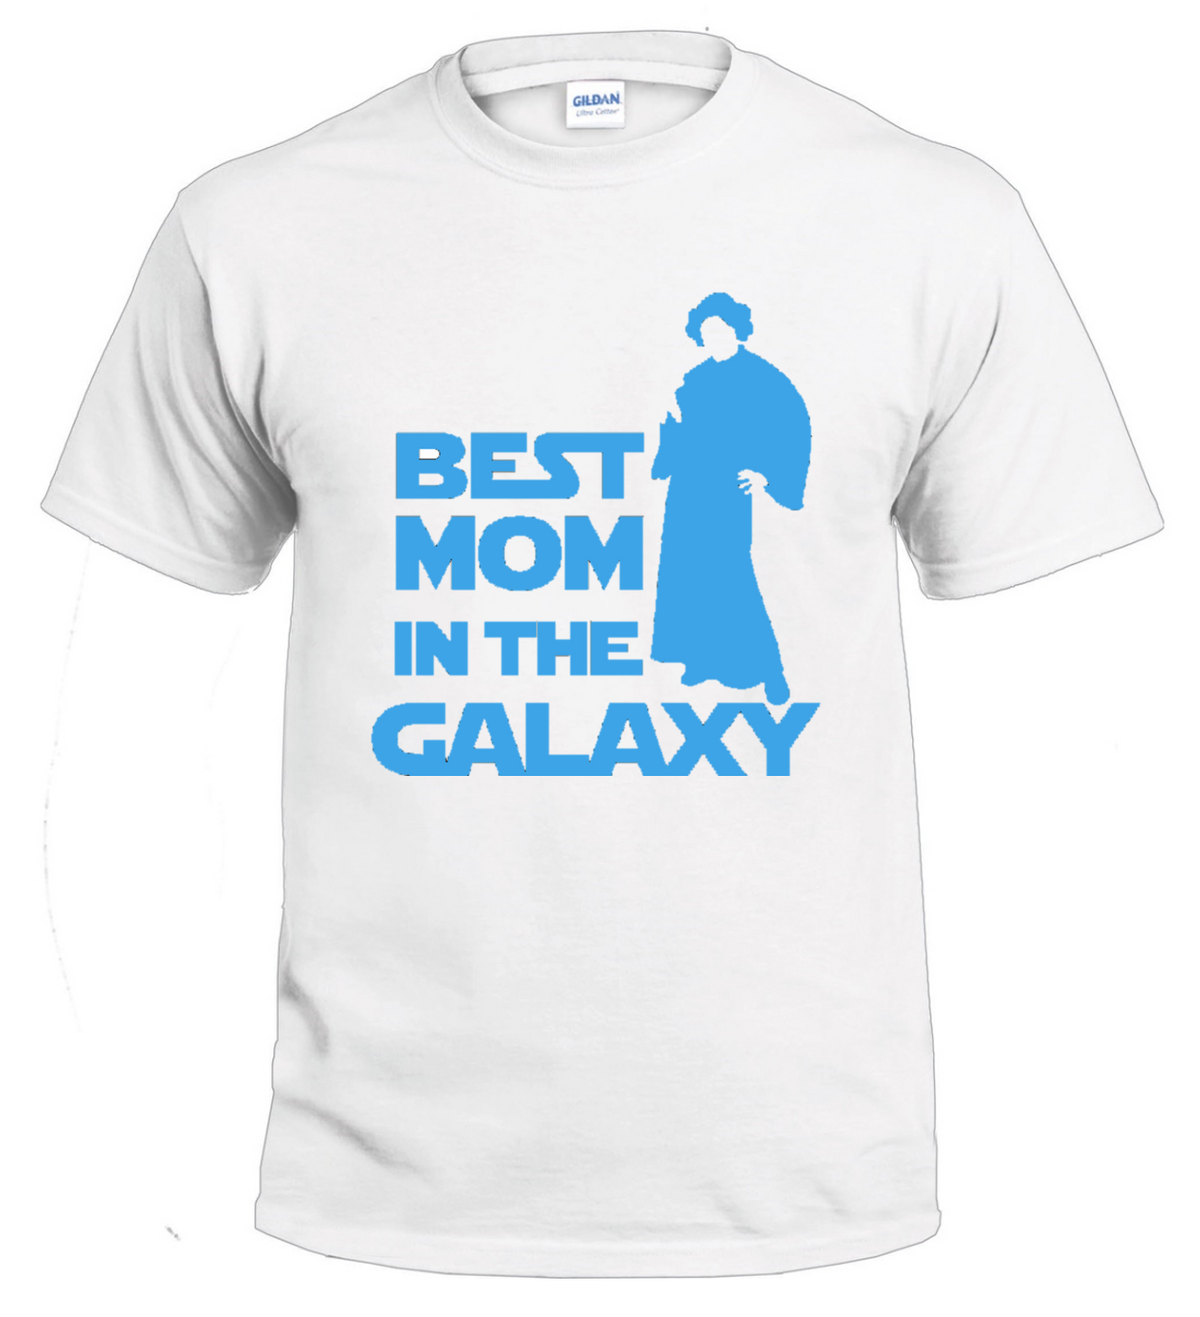 Best Mom in the Galaxy t-shirt